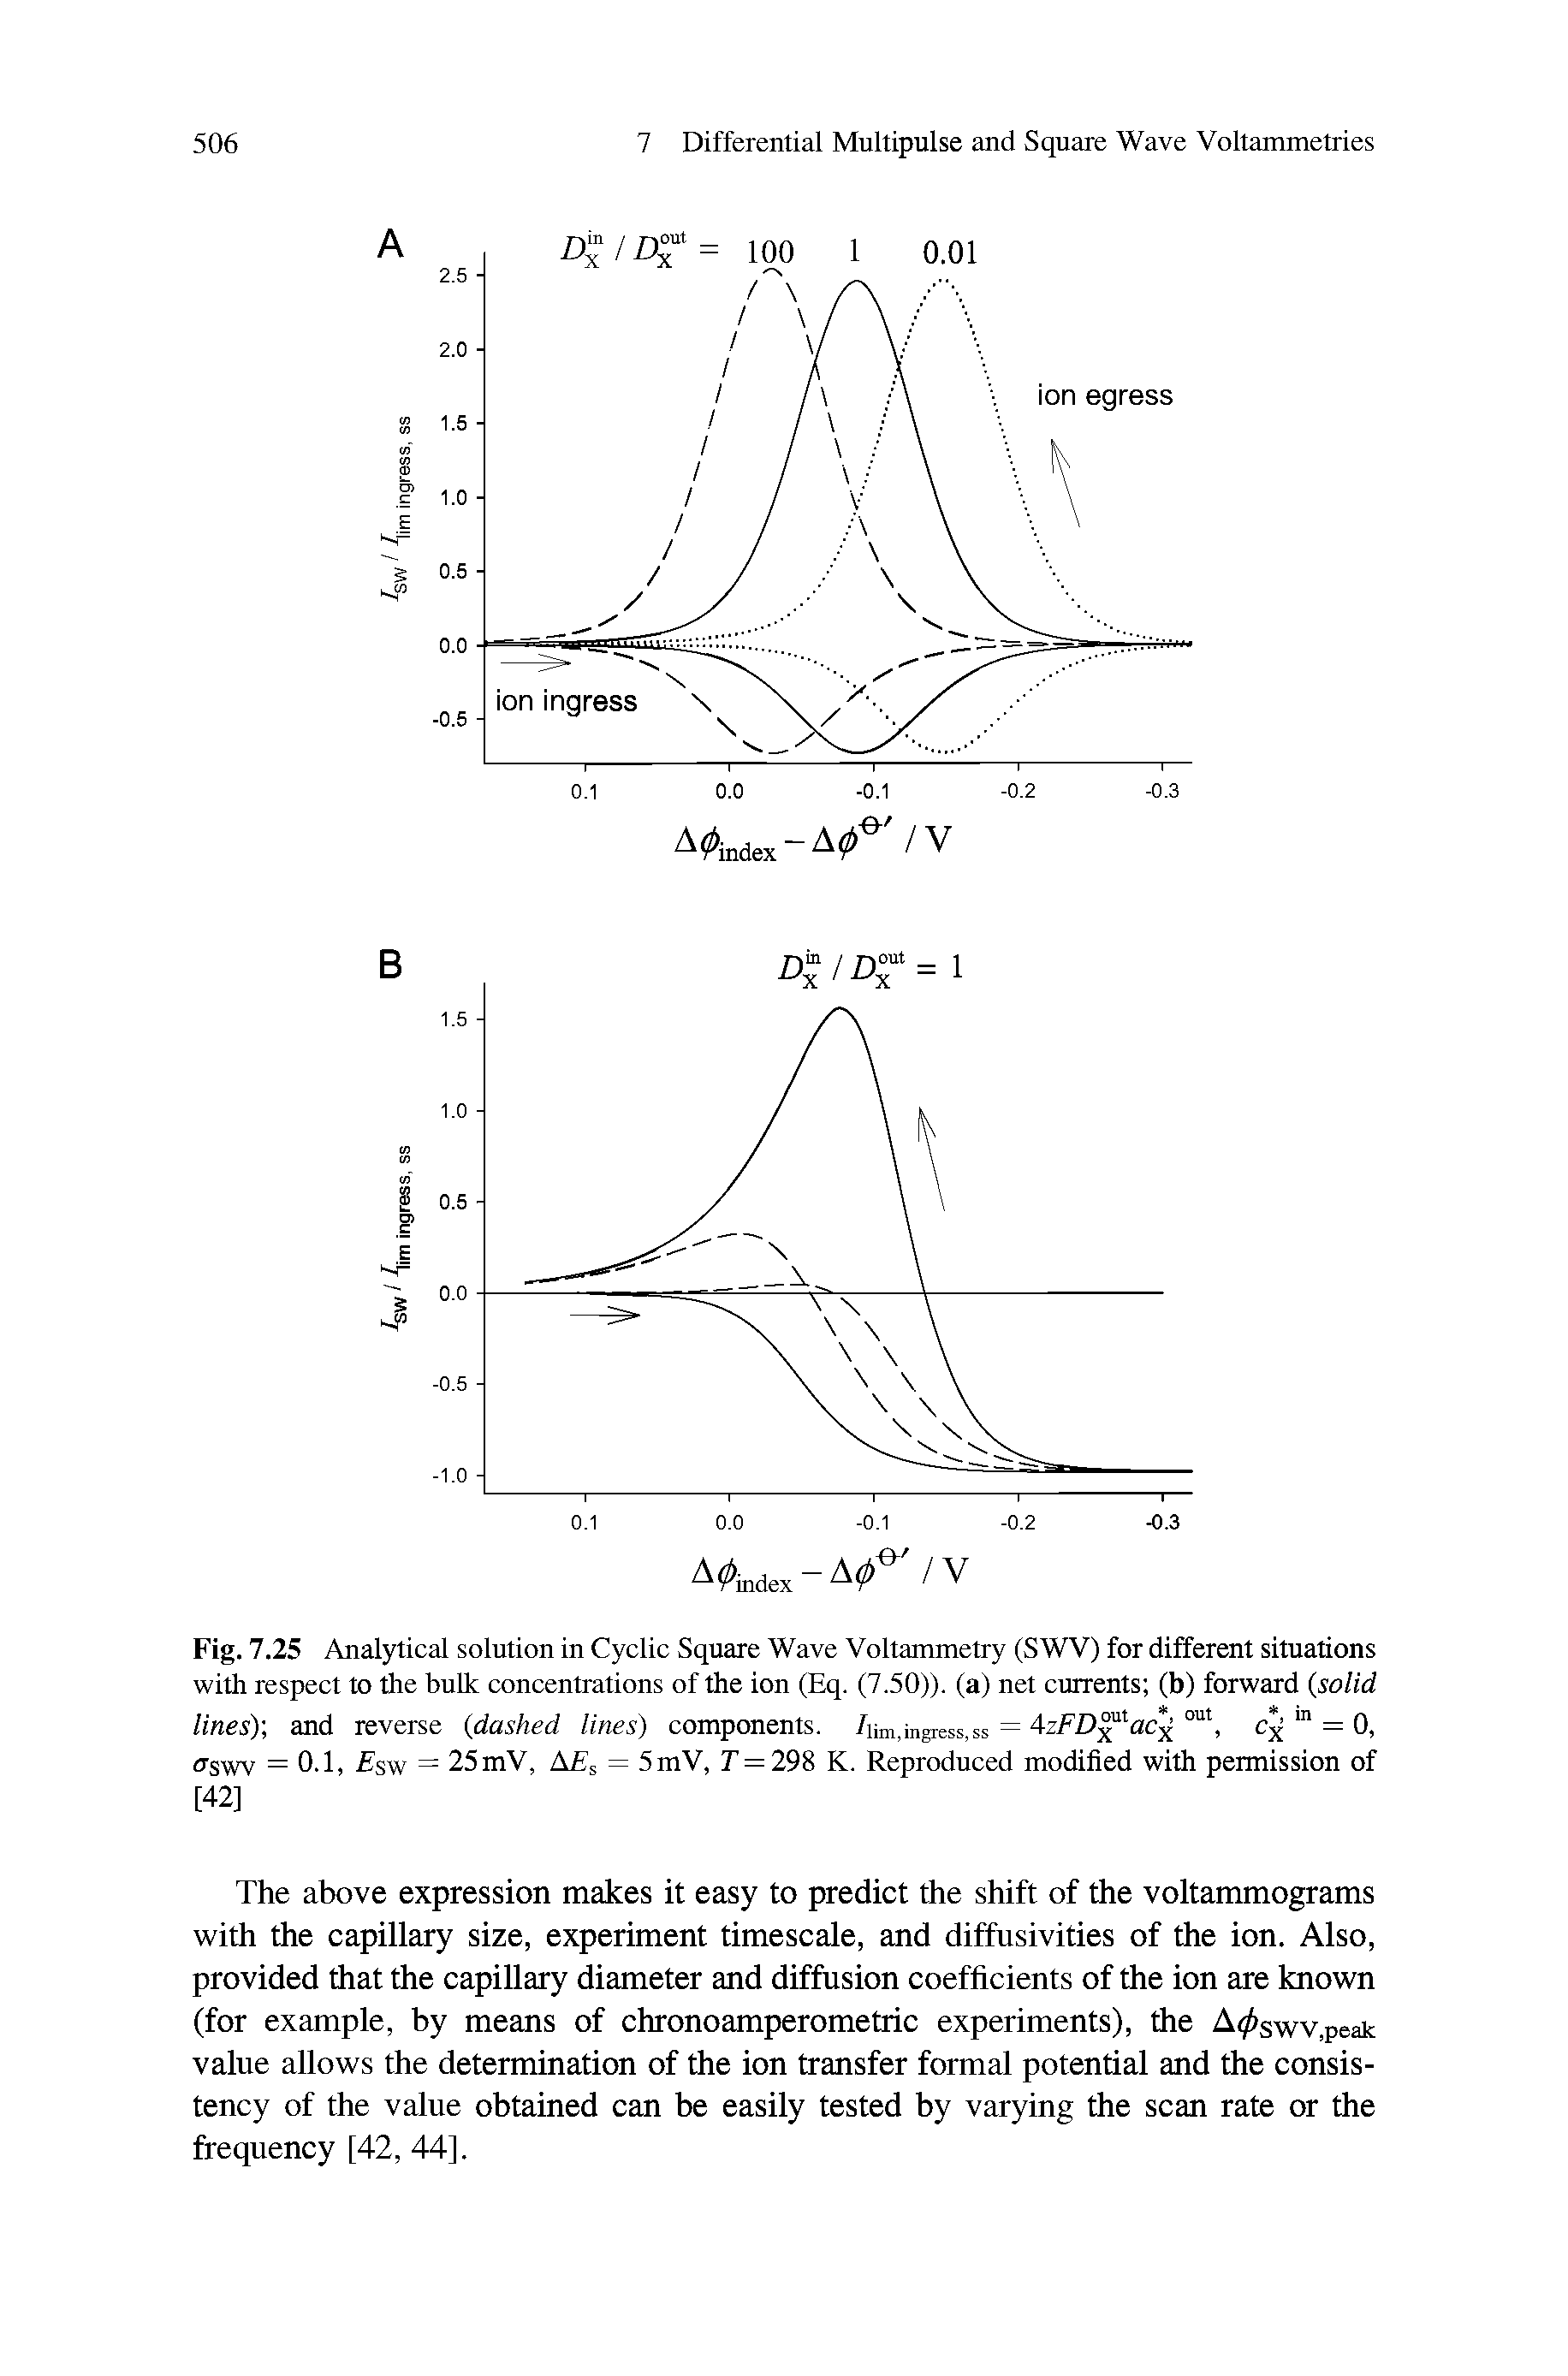 Fig. 7.25 Analytical solution in Cyclic Square Wave Voltammetry (SWV) for different situations with respect to the bulk concentrations of the ion (Eq. (7.50)). (a) net currents (b) forward (solid lines), and reverse (dashed lines) components. 7iim,ingress, ss = AzFD ac out, cj ln = 0, <tswv = 0.1, sw = 25 mV, AEs = 5 mV, T = 298 K. Reproduced modified with permission of [42]...